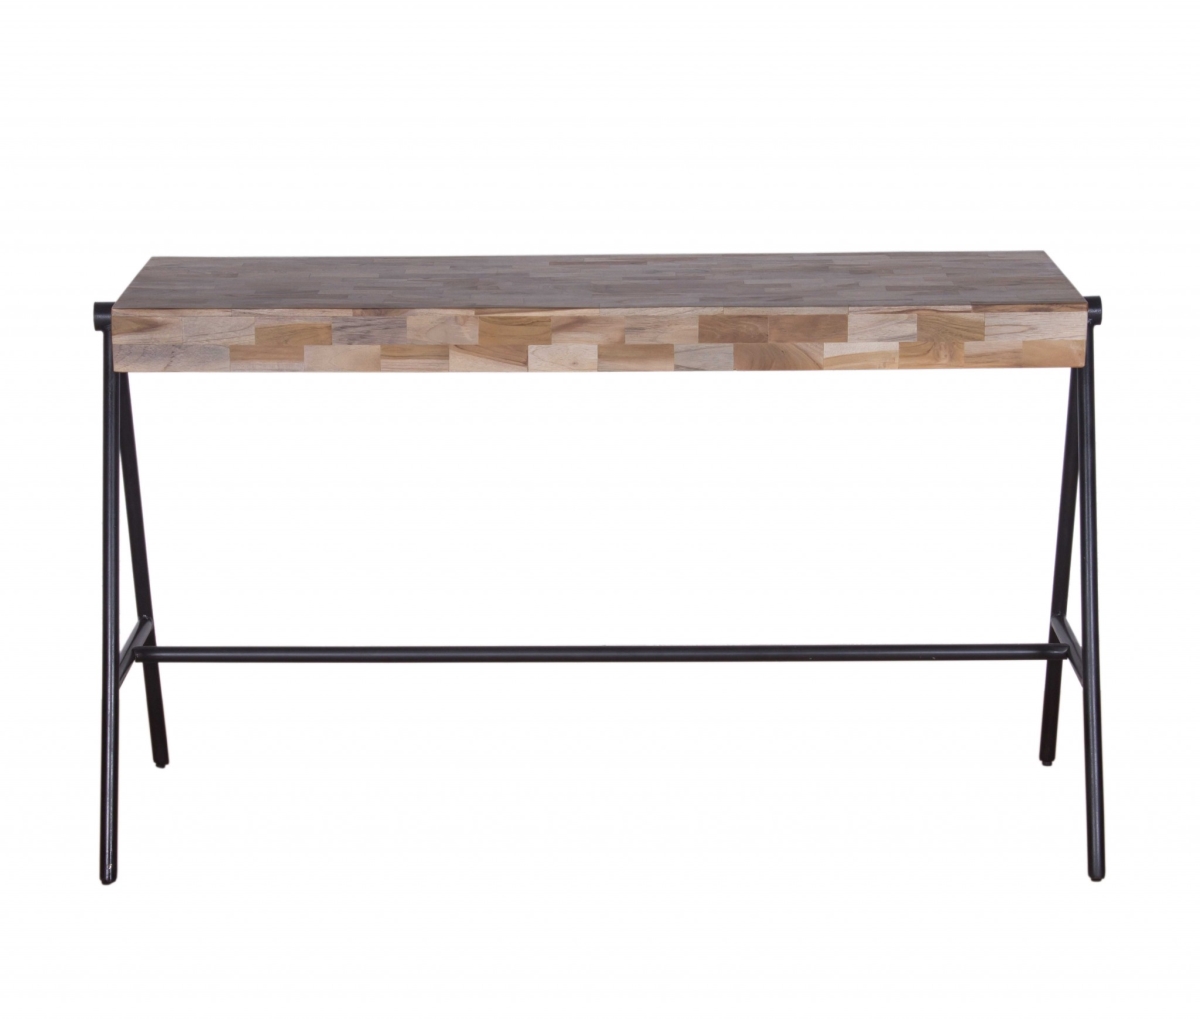 373002 Multi Color Wood & Metal Console Table - 16 X 48 X 30 In.